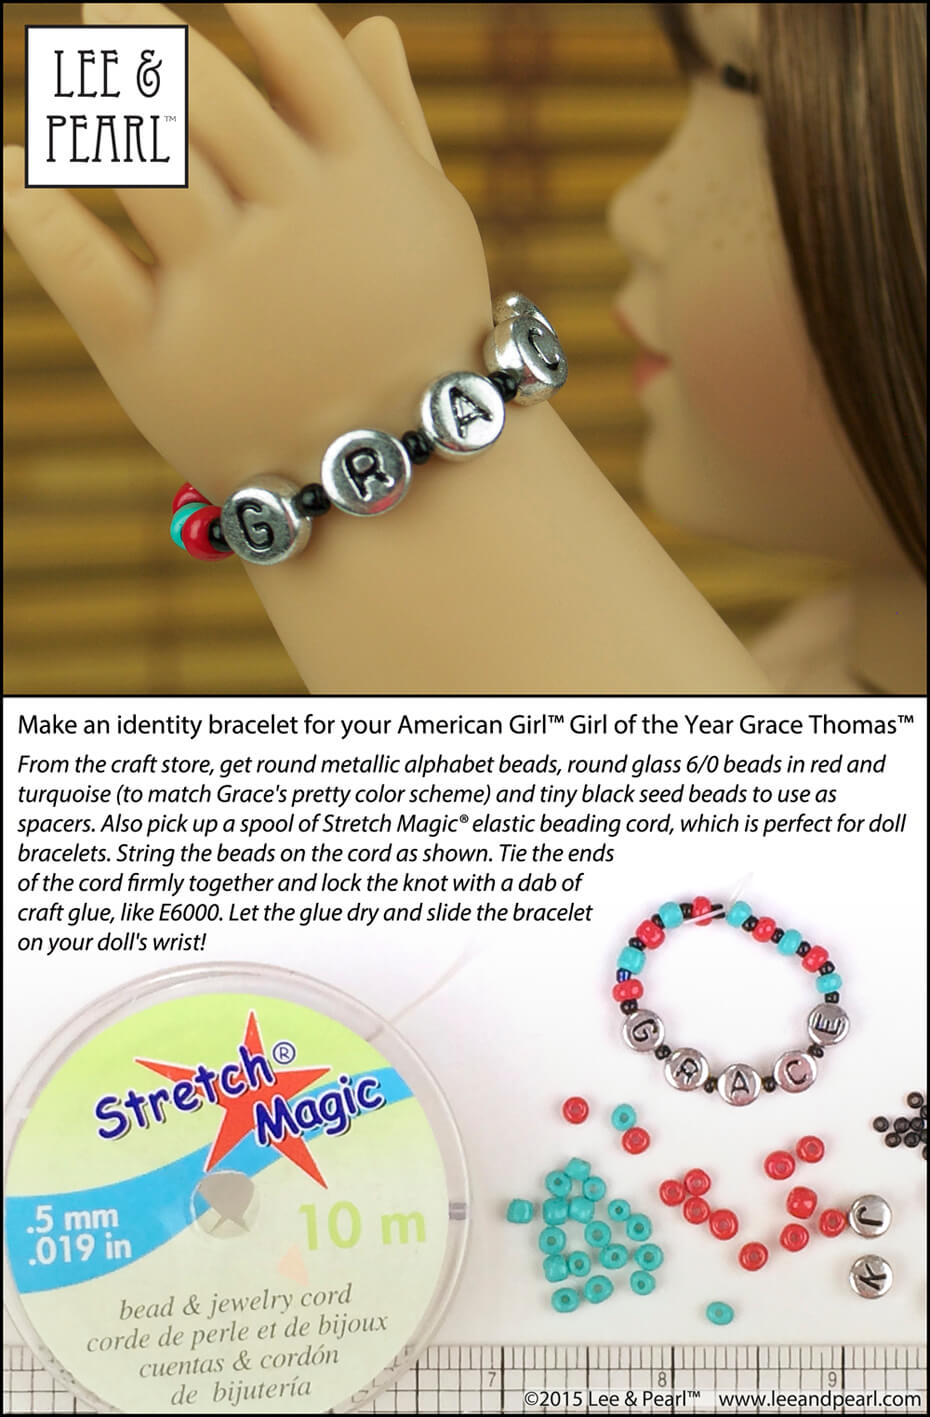 Make identity bracelets for your 18" dolls - like American Girl™ Girl of the Year Grace Thomas™ - using beads from the craft store